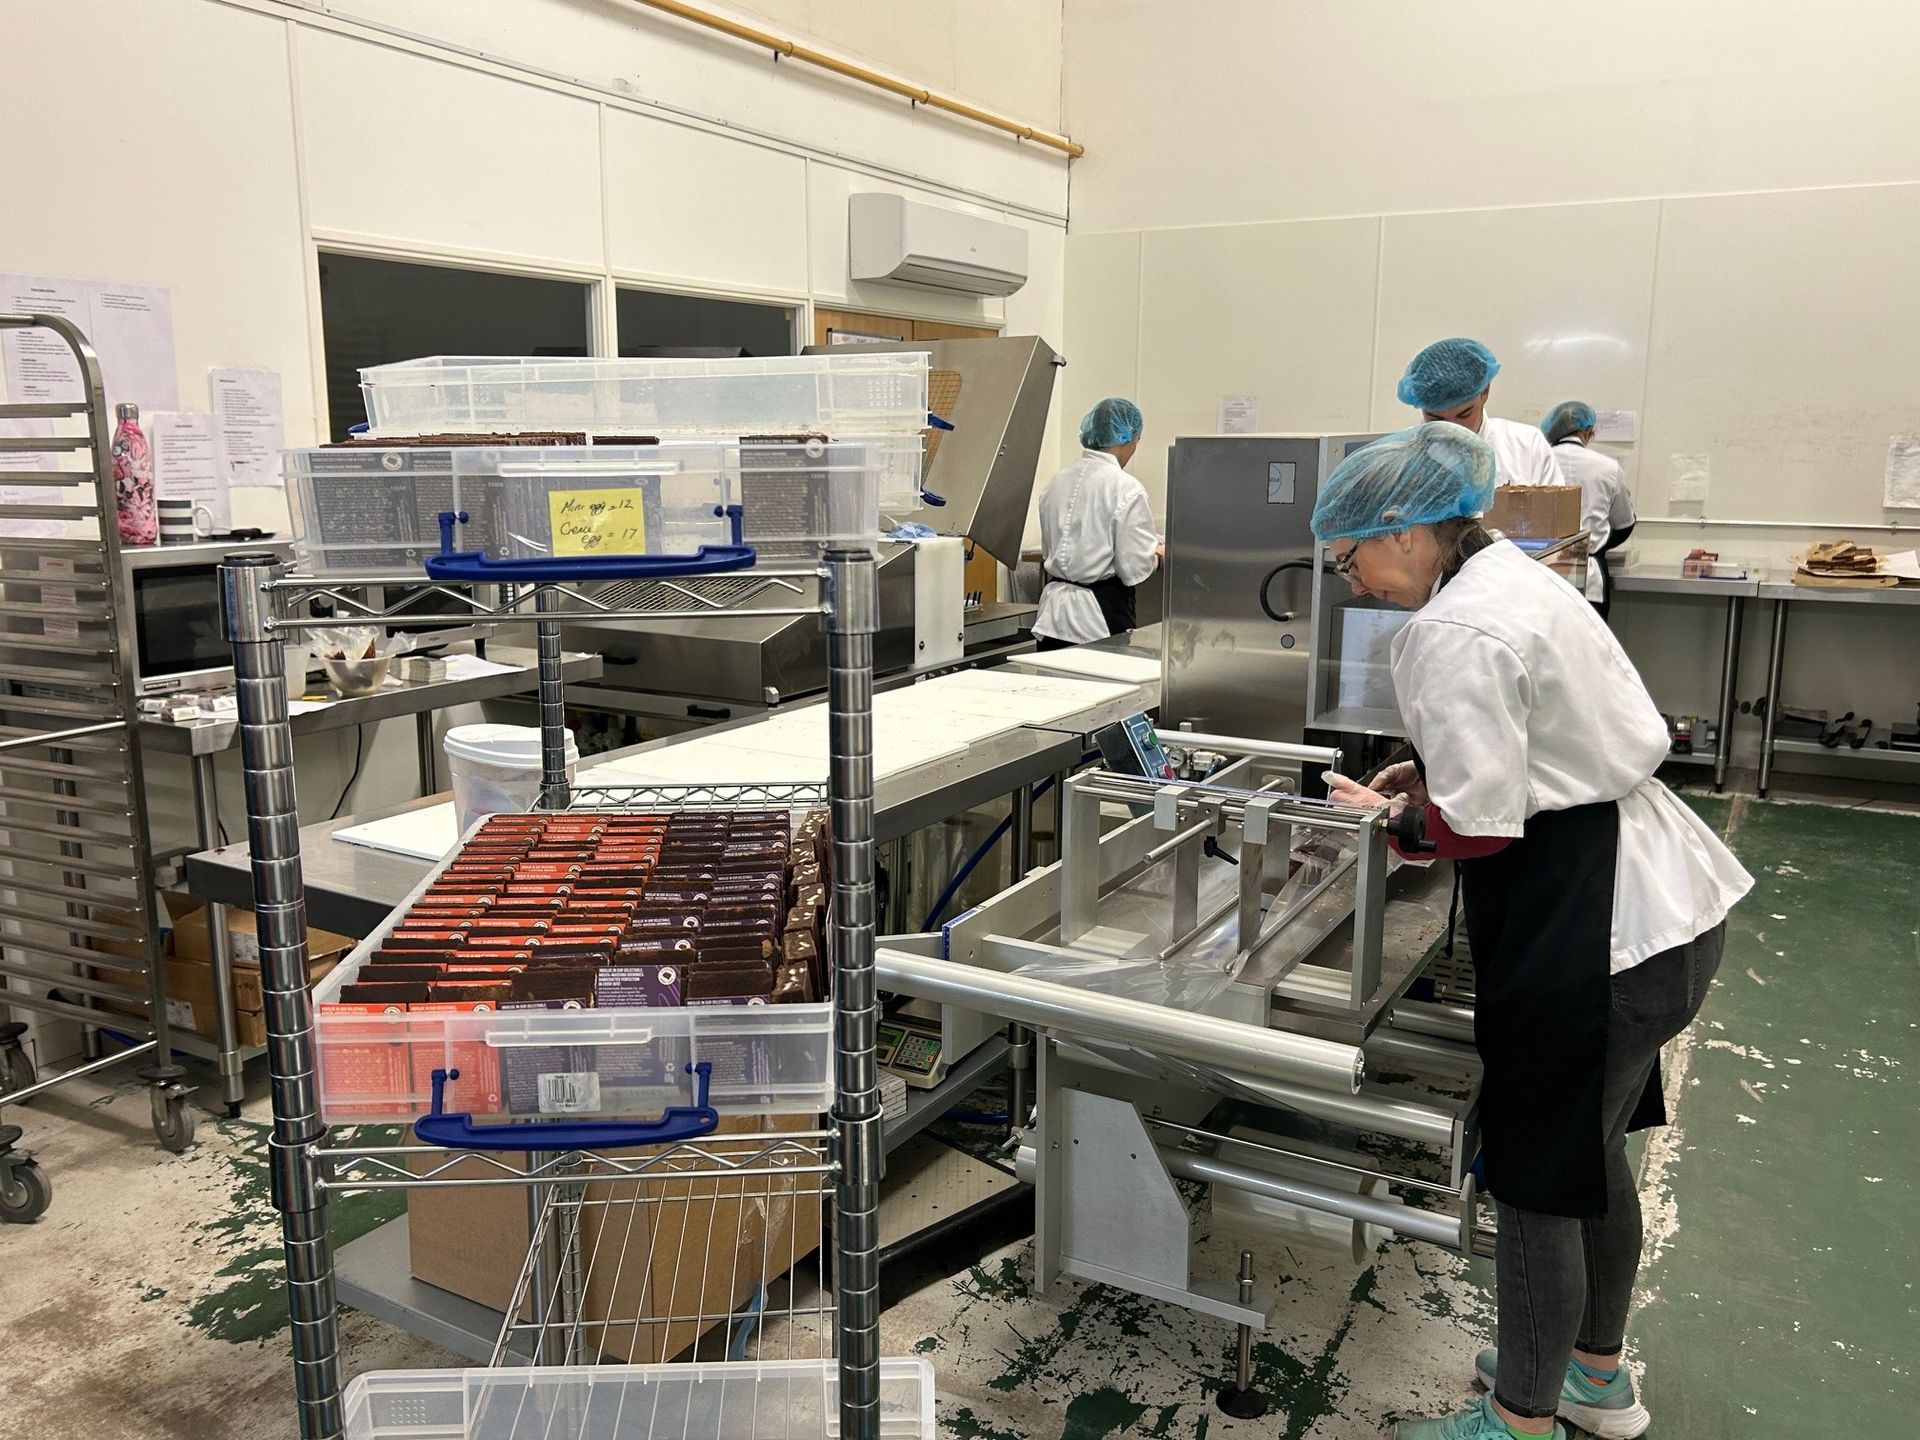 Several operatives are working on a food production line. They are producing chocolate brownies.